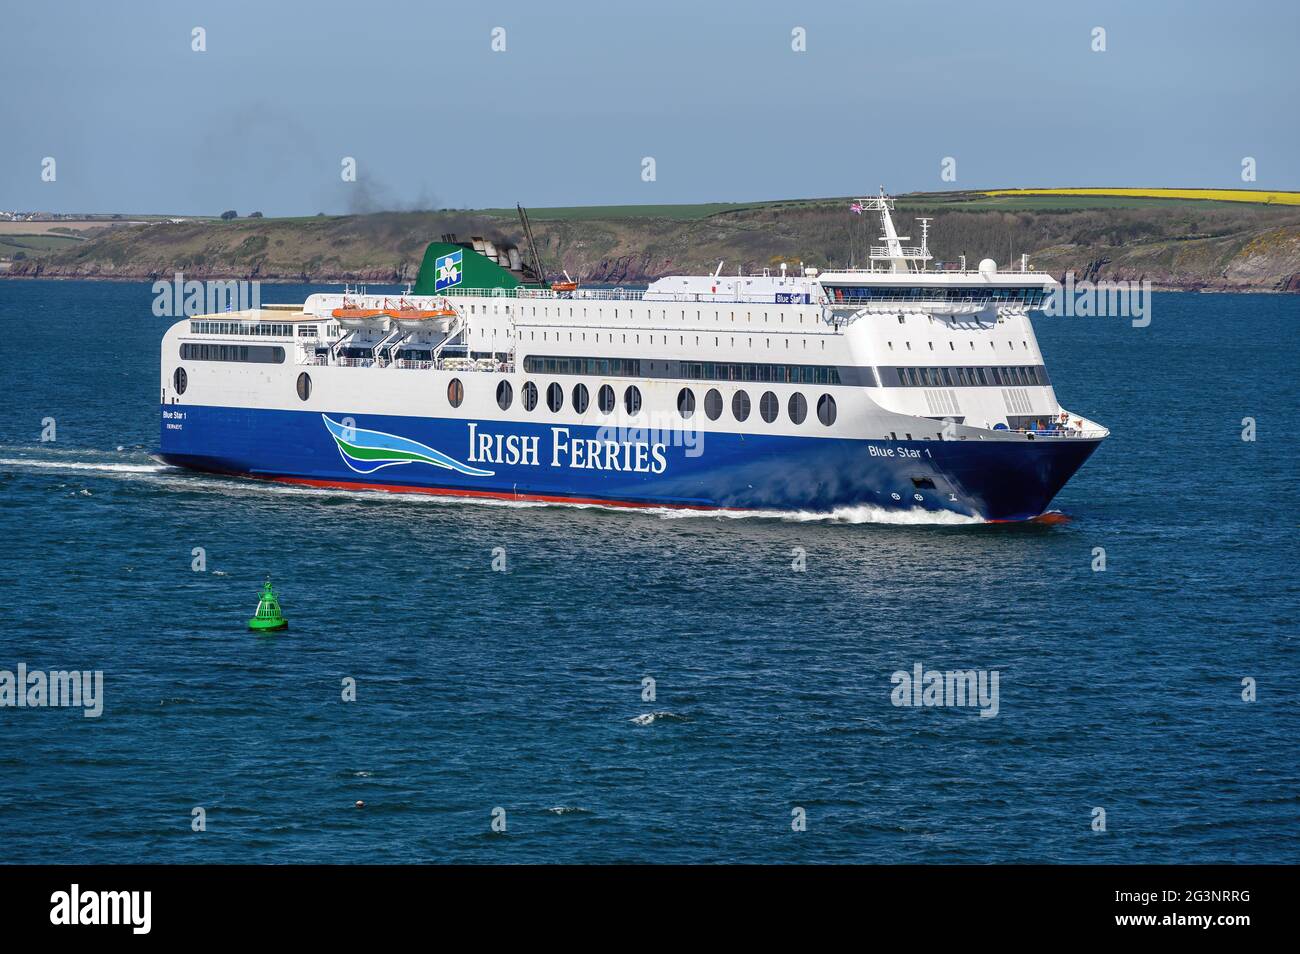 The chartered Greek ferry Blue Star 1 in Milford Haven en route to Pembroke Dock after crossing the Irish Sea from the port of Rosslare - April 2021 Stock Photo